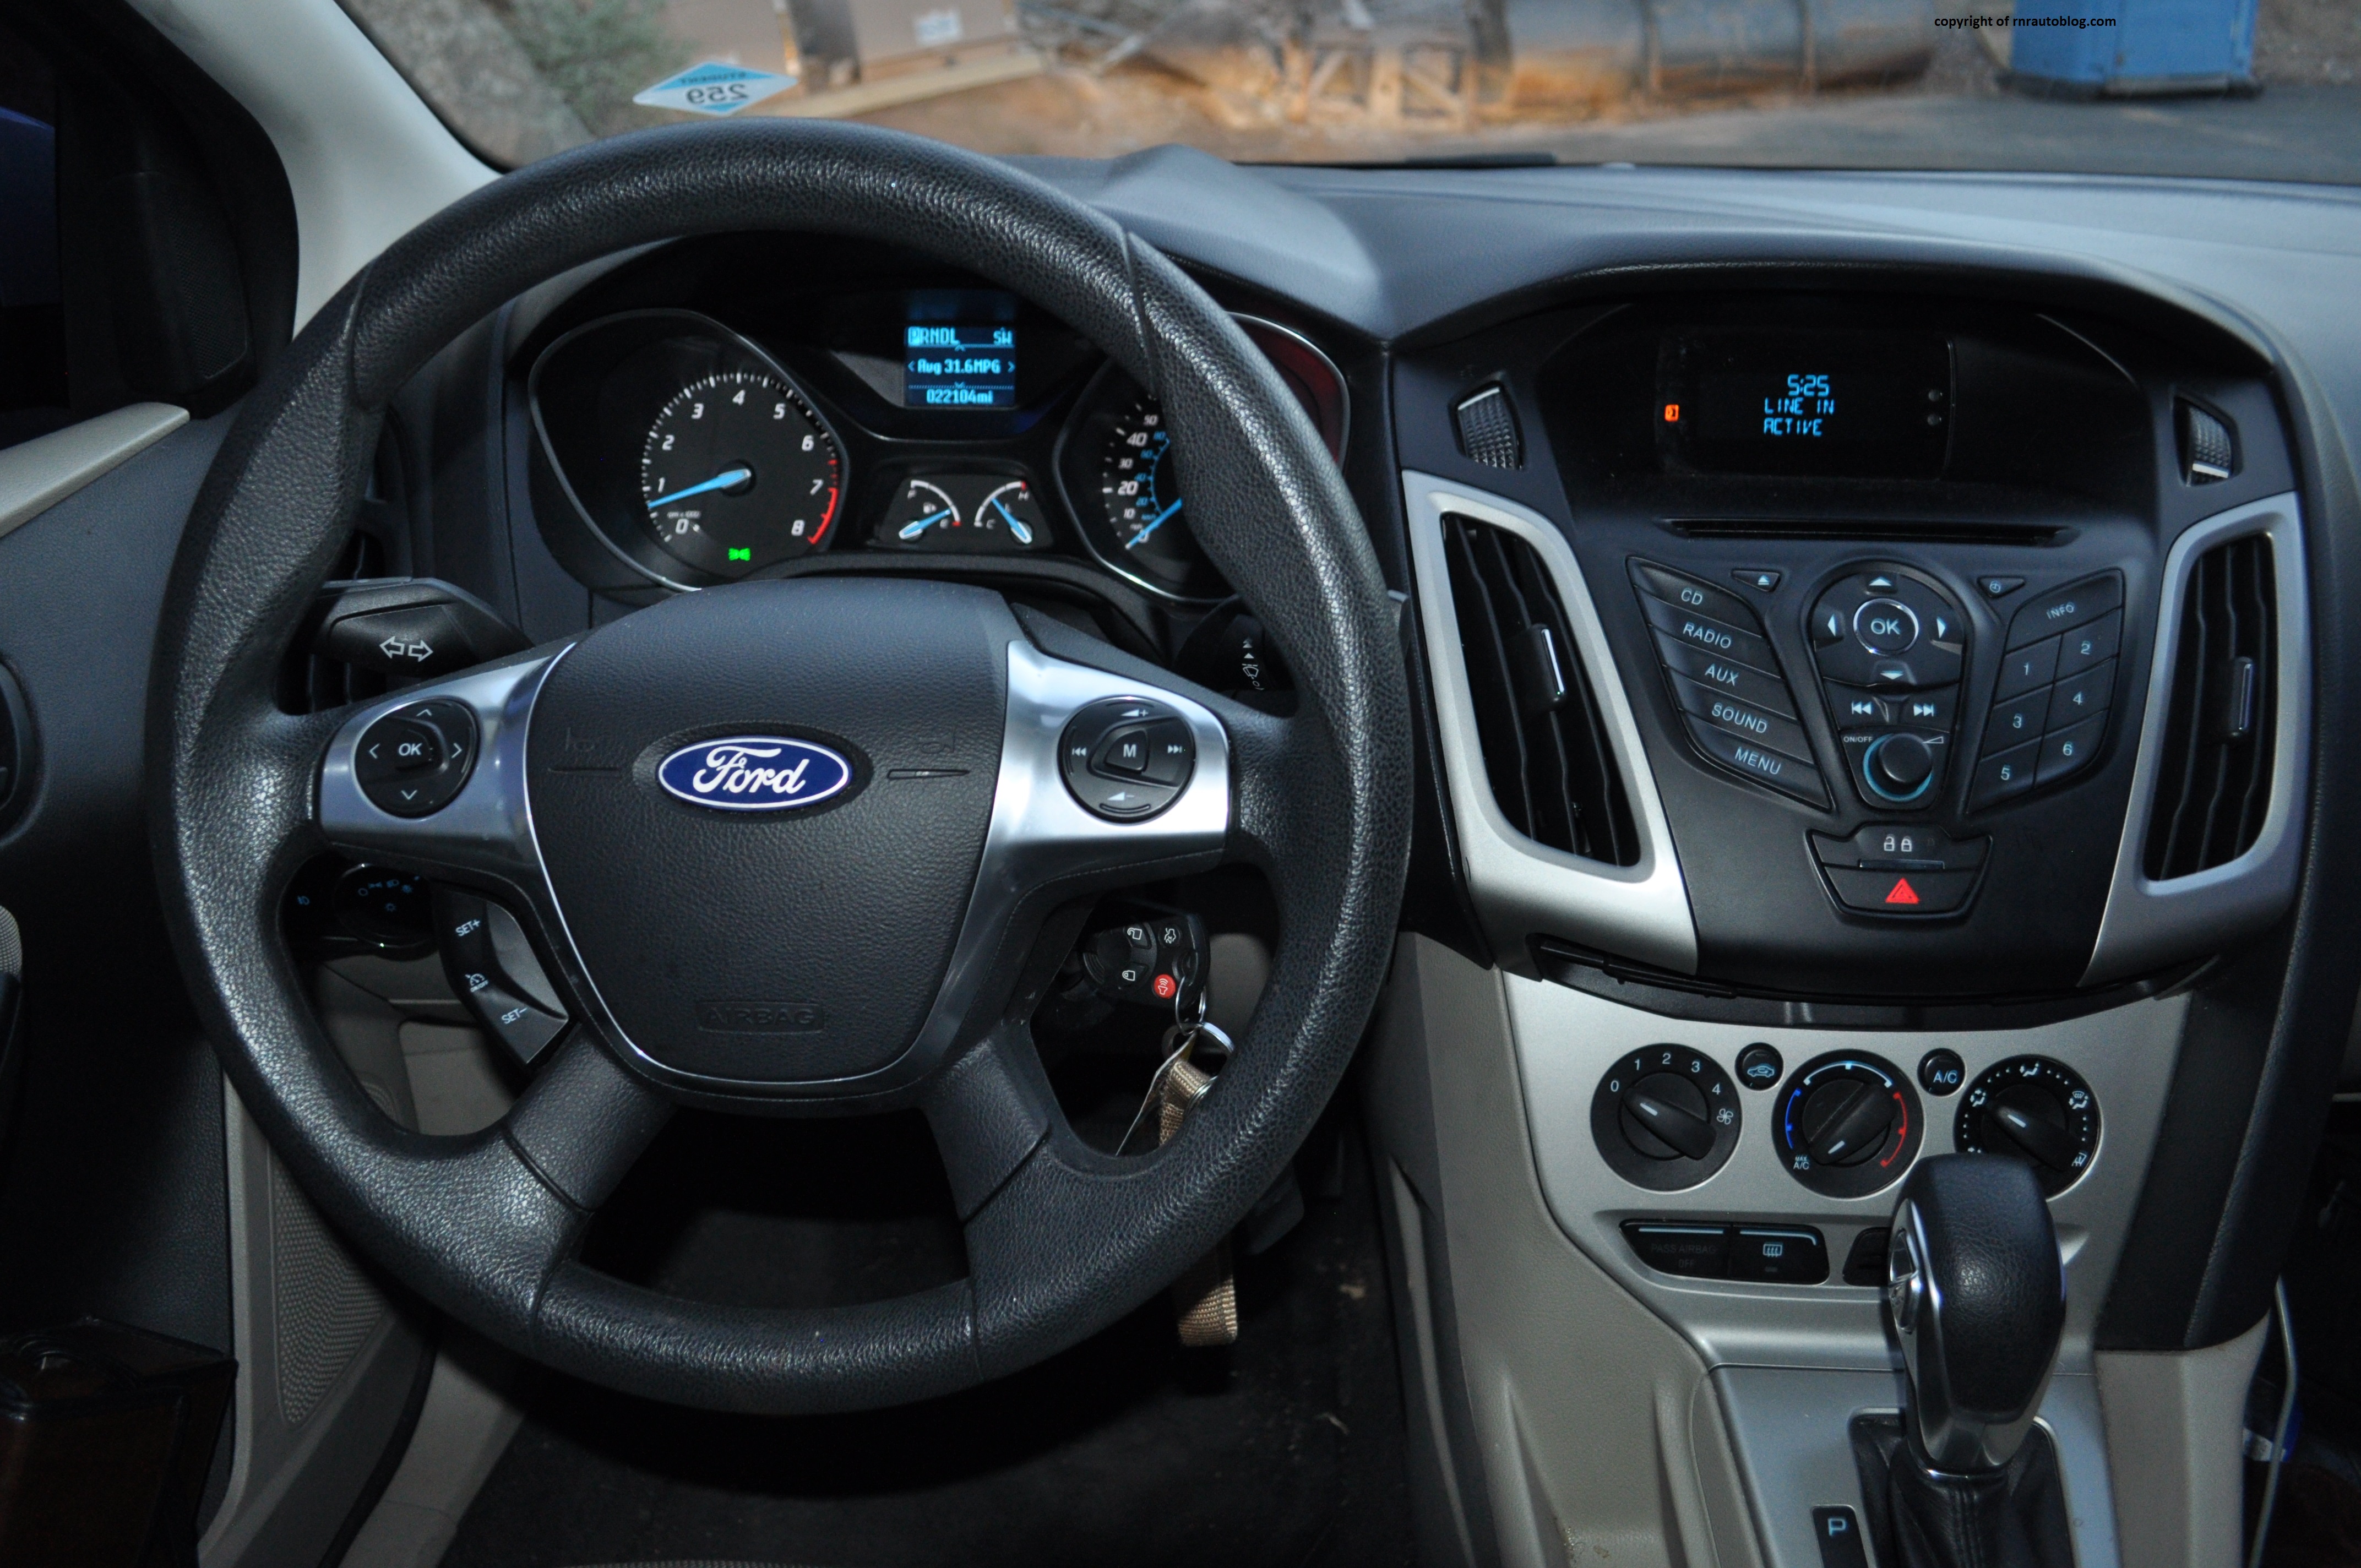 2012 Ford focus automatic transmission recall #6